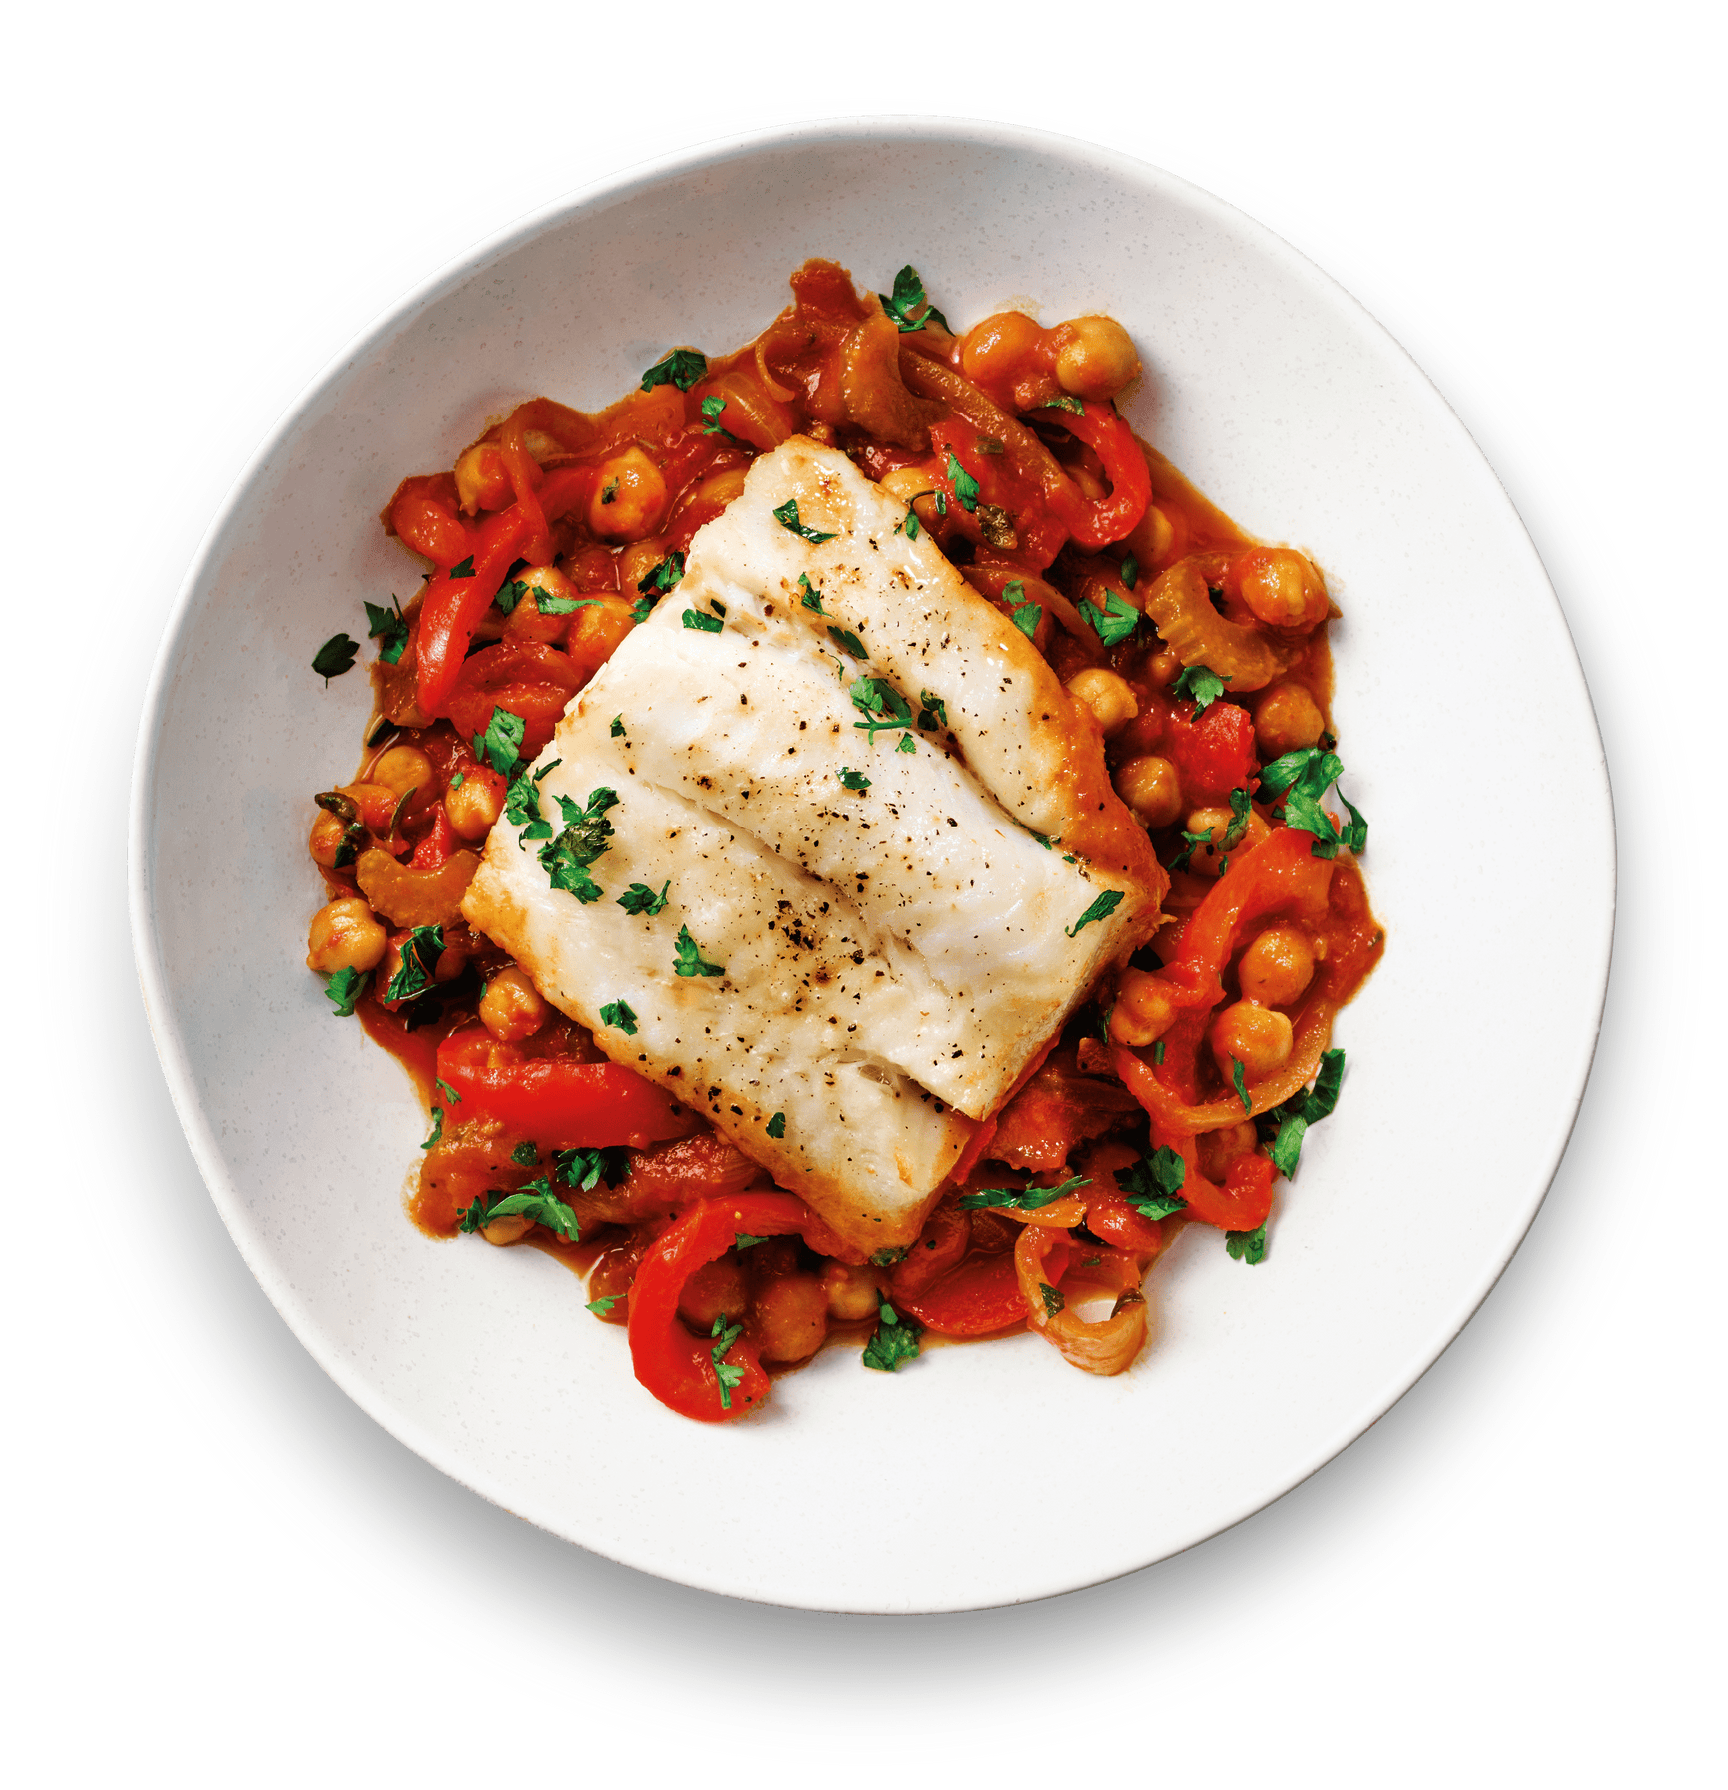 Fred's Spanish style hake with tomatoes and chickpeas